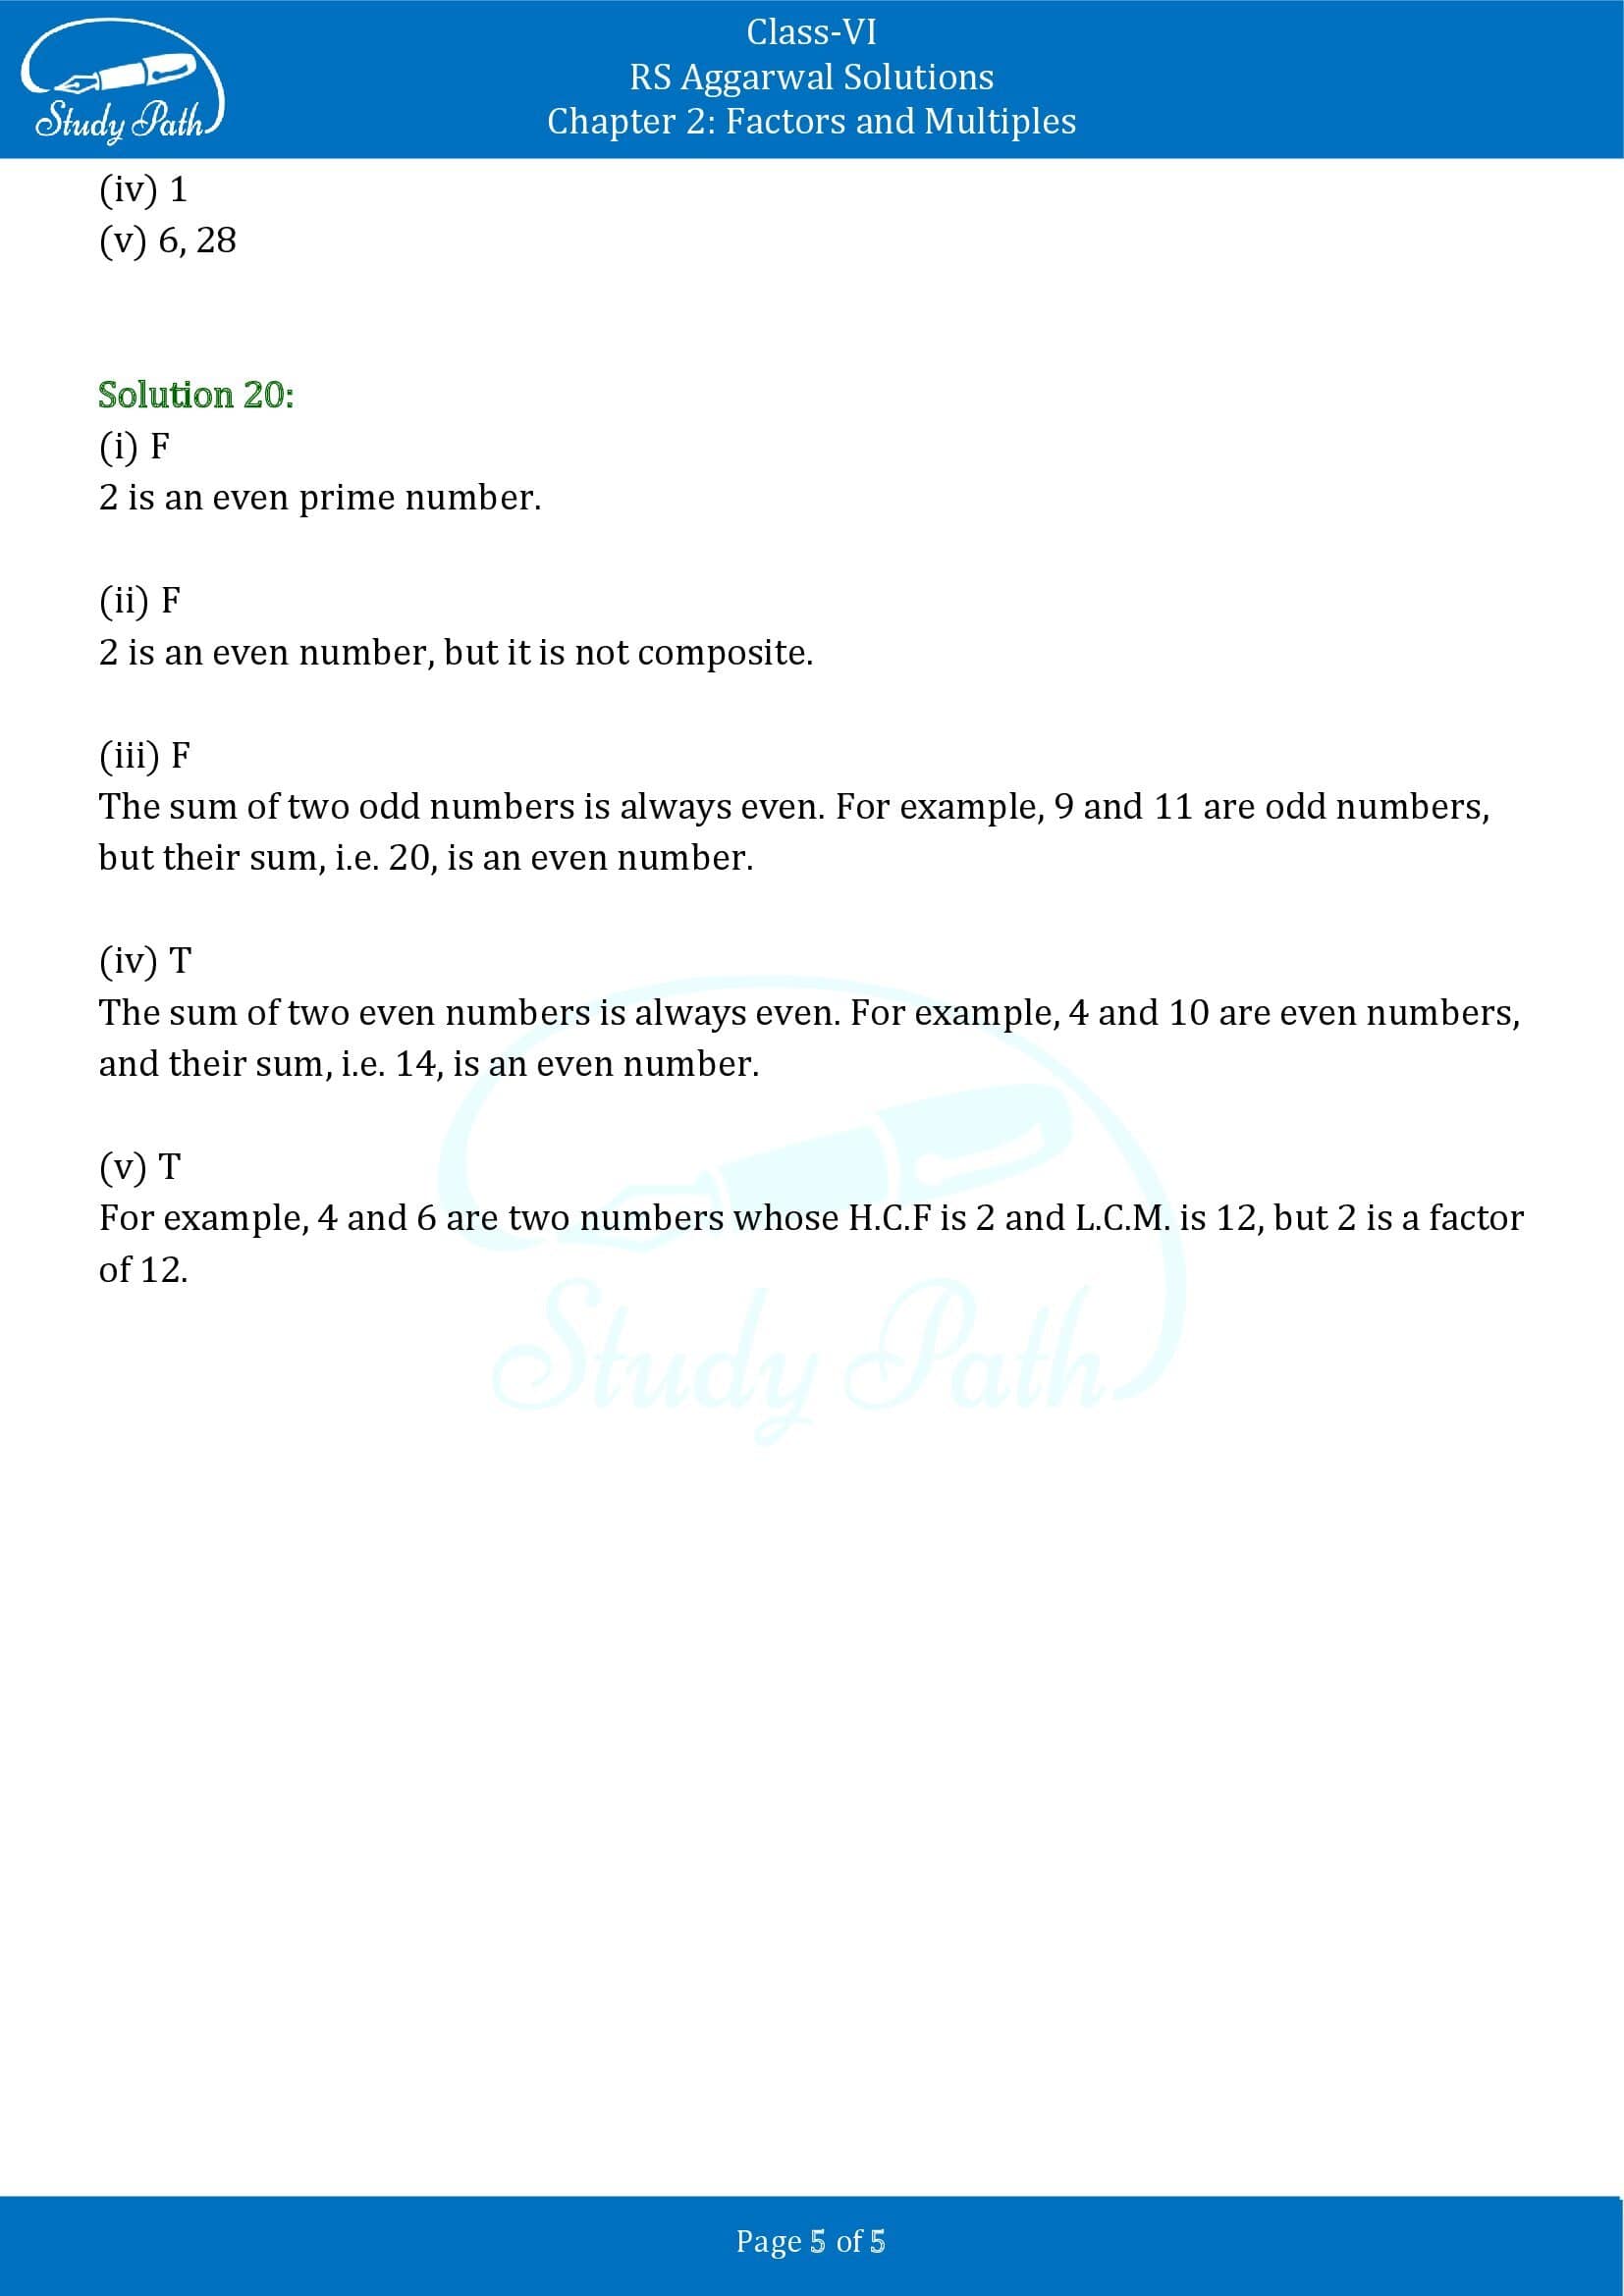 RS Aggarwal Solutions Class 6 Chapter 2 Factors and Multiples Test Paper 00005